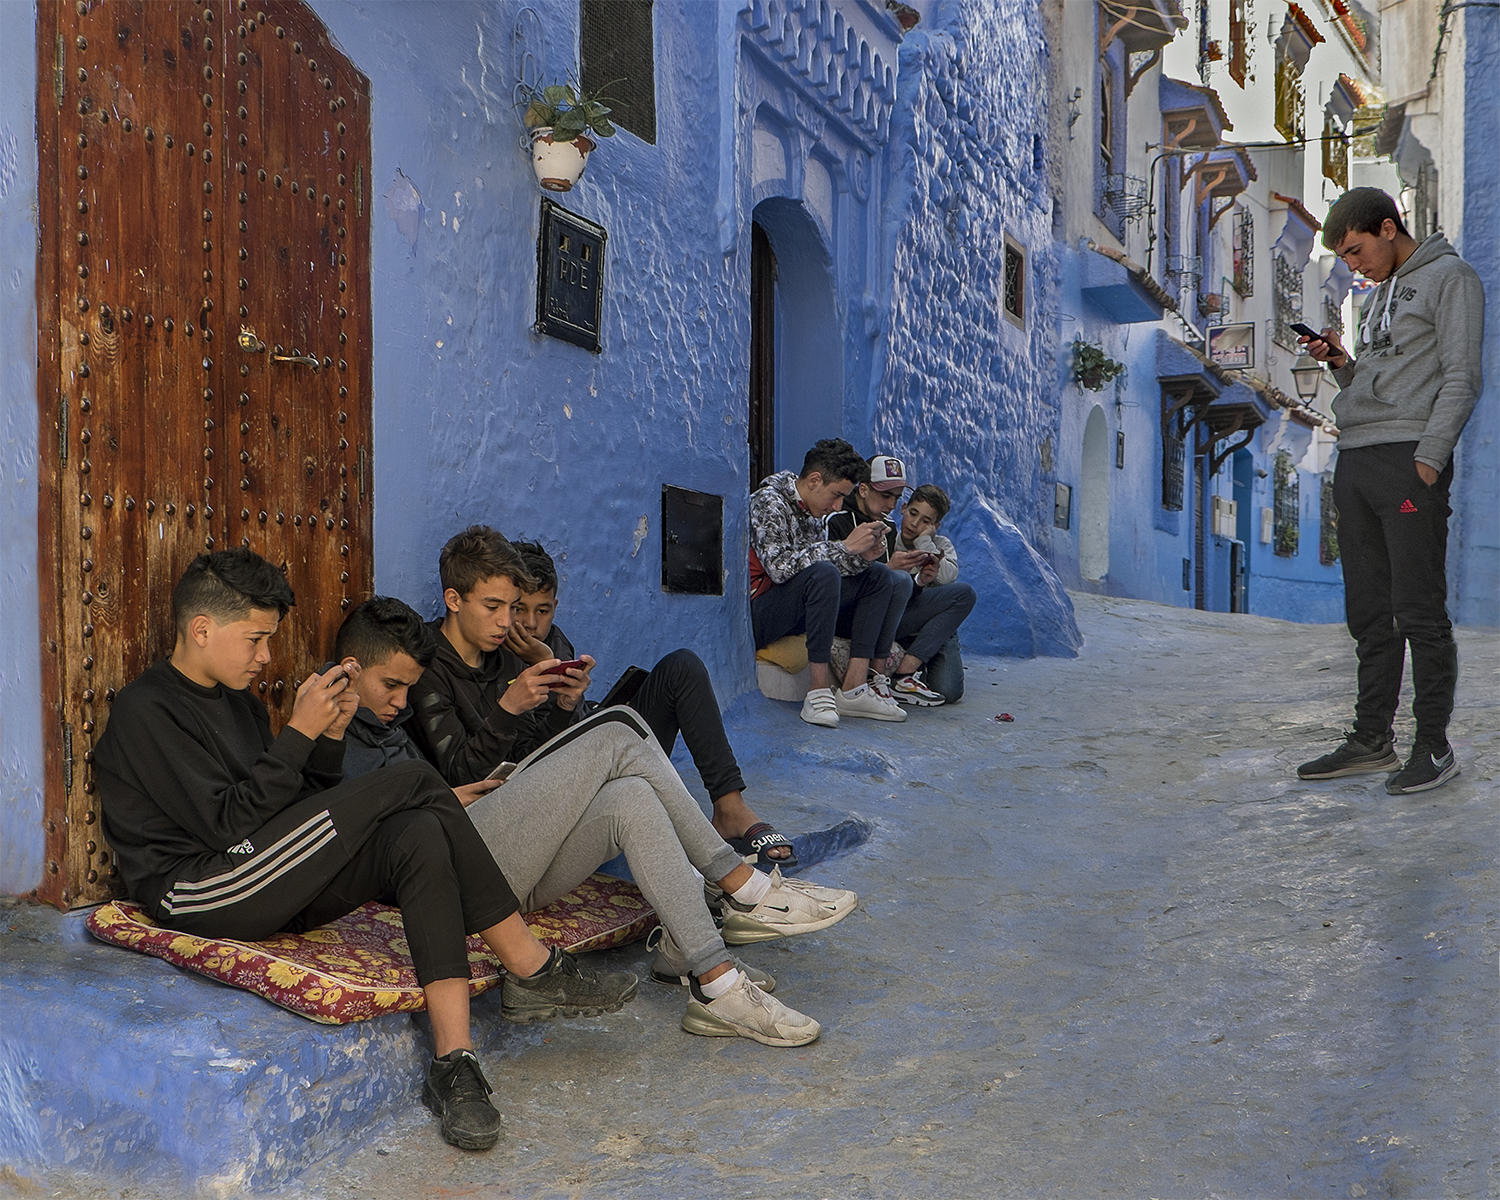 Young Men at Leisure, Chefchauen
, Morocco<p><a class="nav-link" href="/content.html?page=6/#TA75" target="_top">Thumbnail</a>